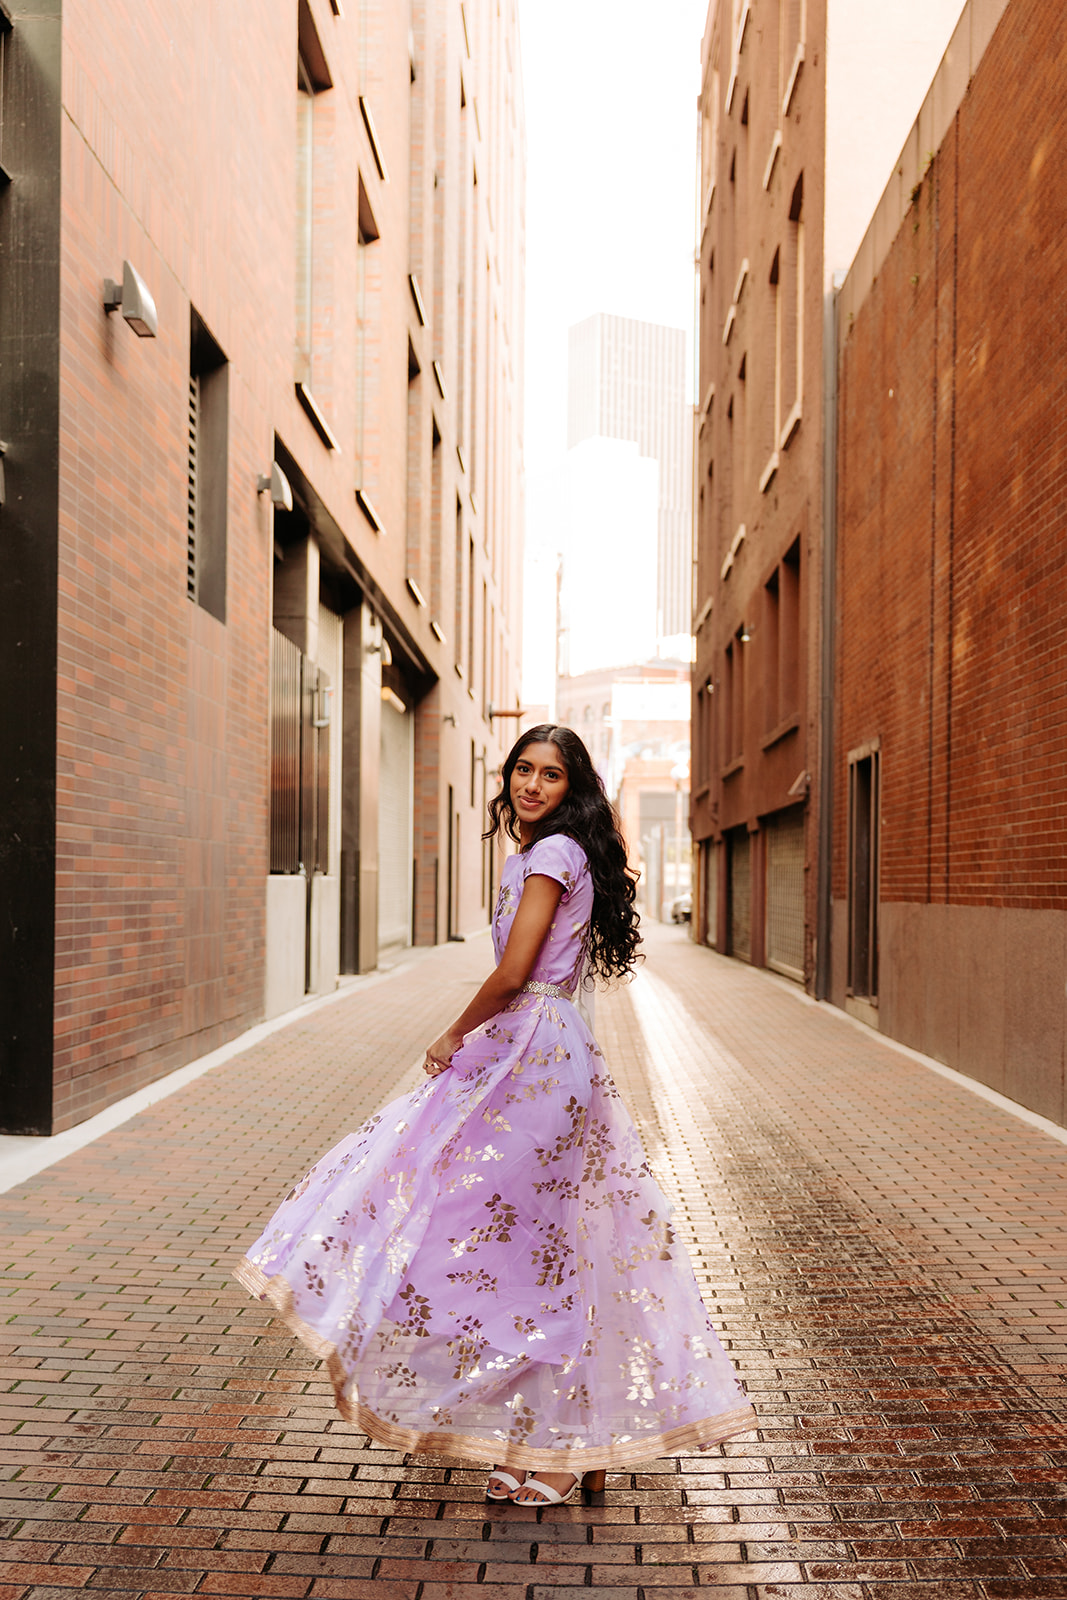 An edgy photo of an ethnic high school senior girl posing in front of a brick alleyway in Pioneer Square, Seattle.